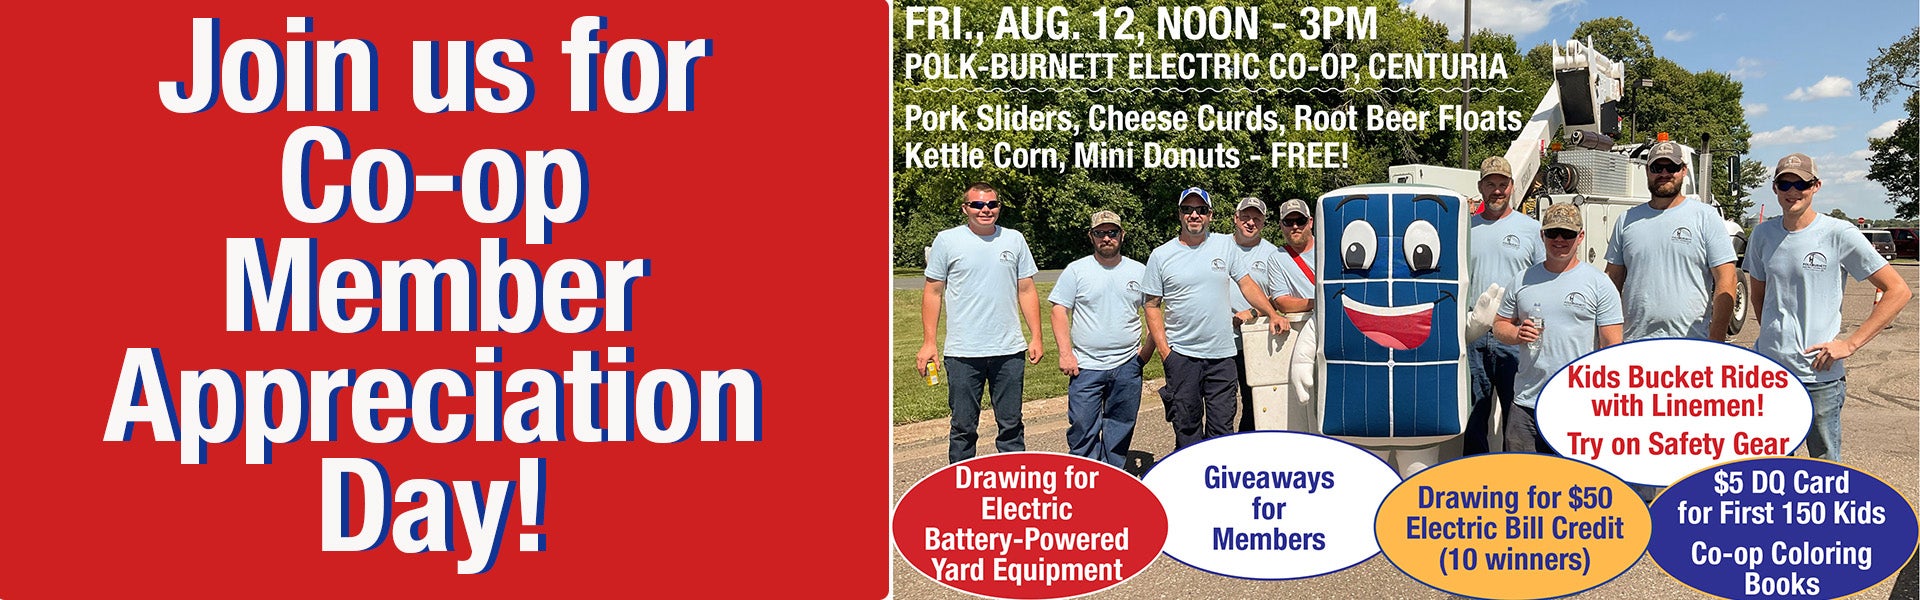 Member Appreciation Day is August 12